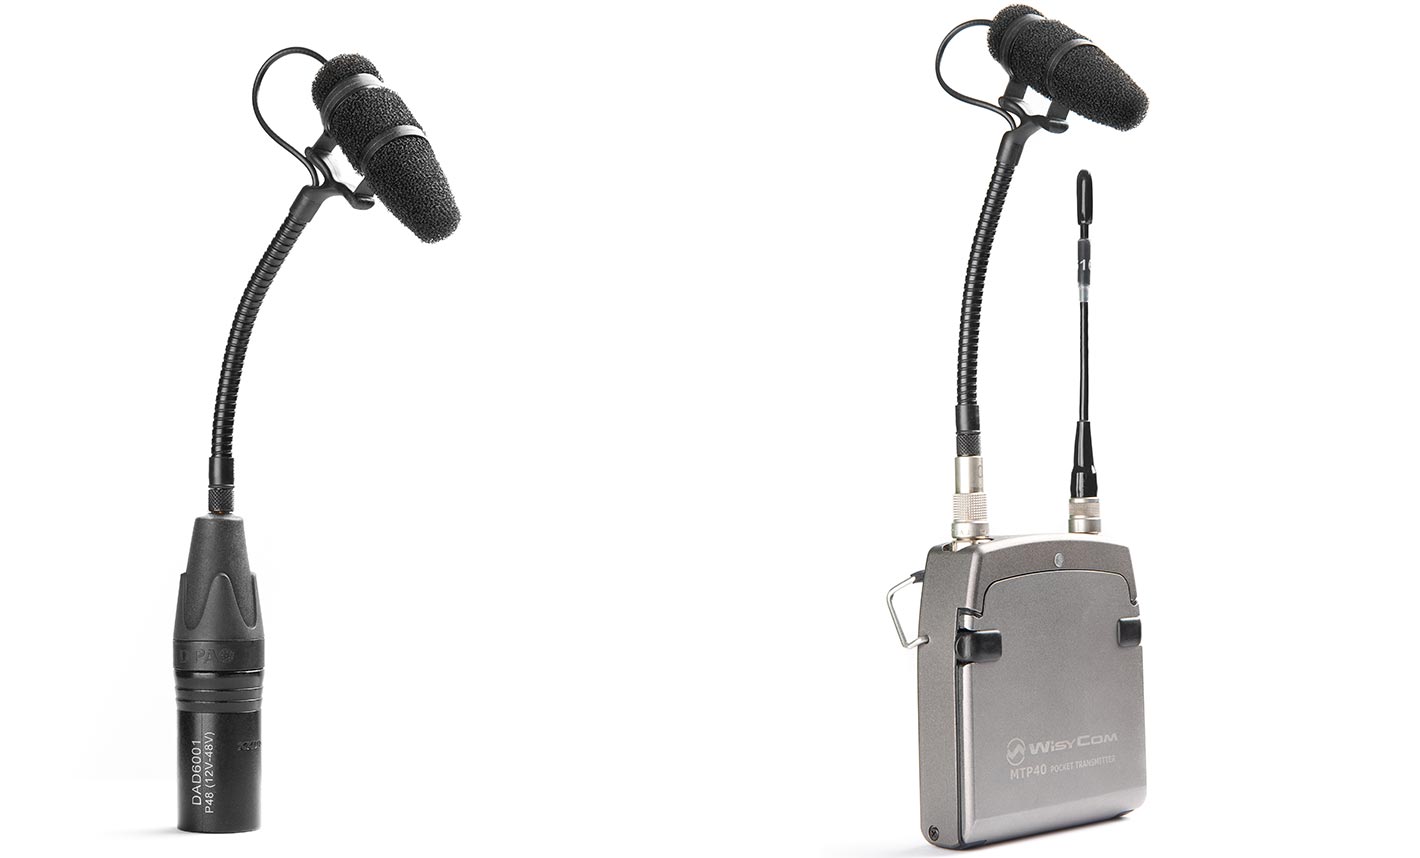 DPA’s new interview microphone is optimized for social distancing